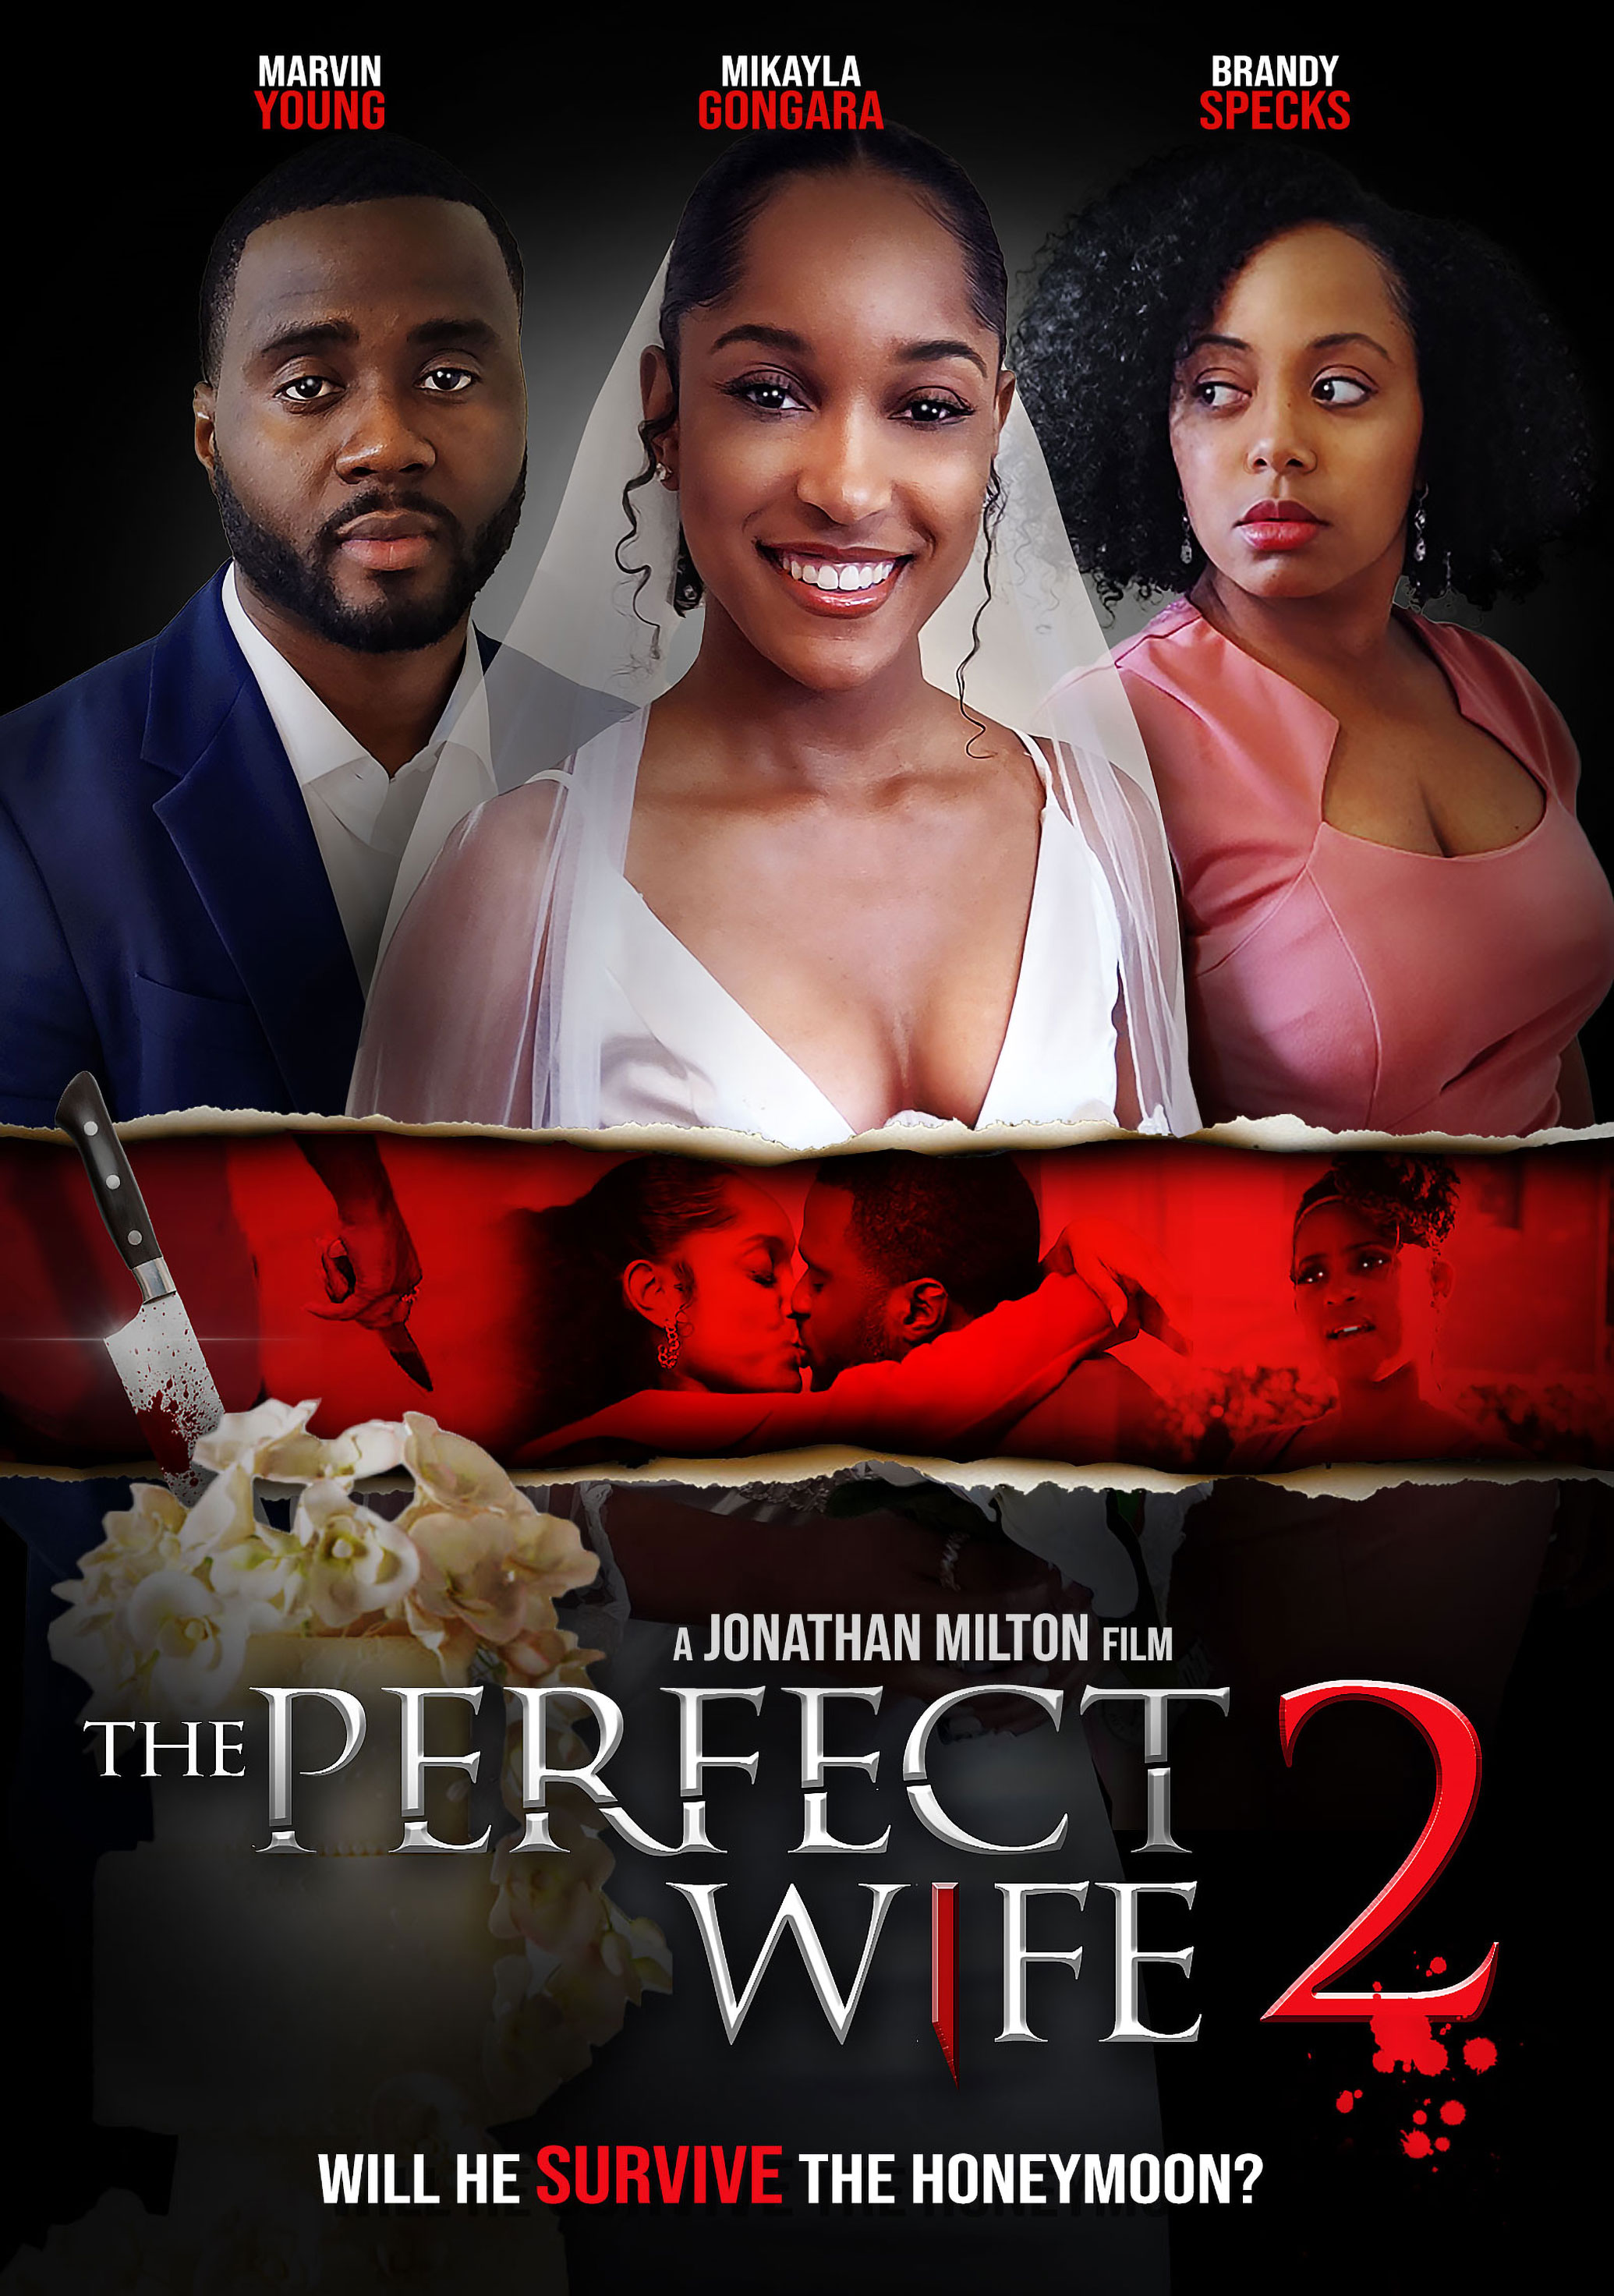 The Perfect Wife 2 (2021) Thriller, Directed By Jonathan Milton image